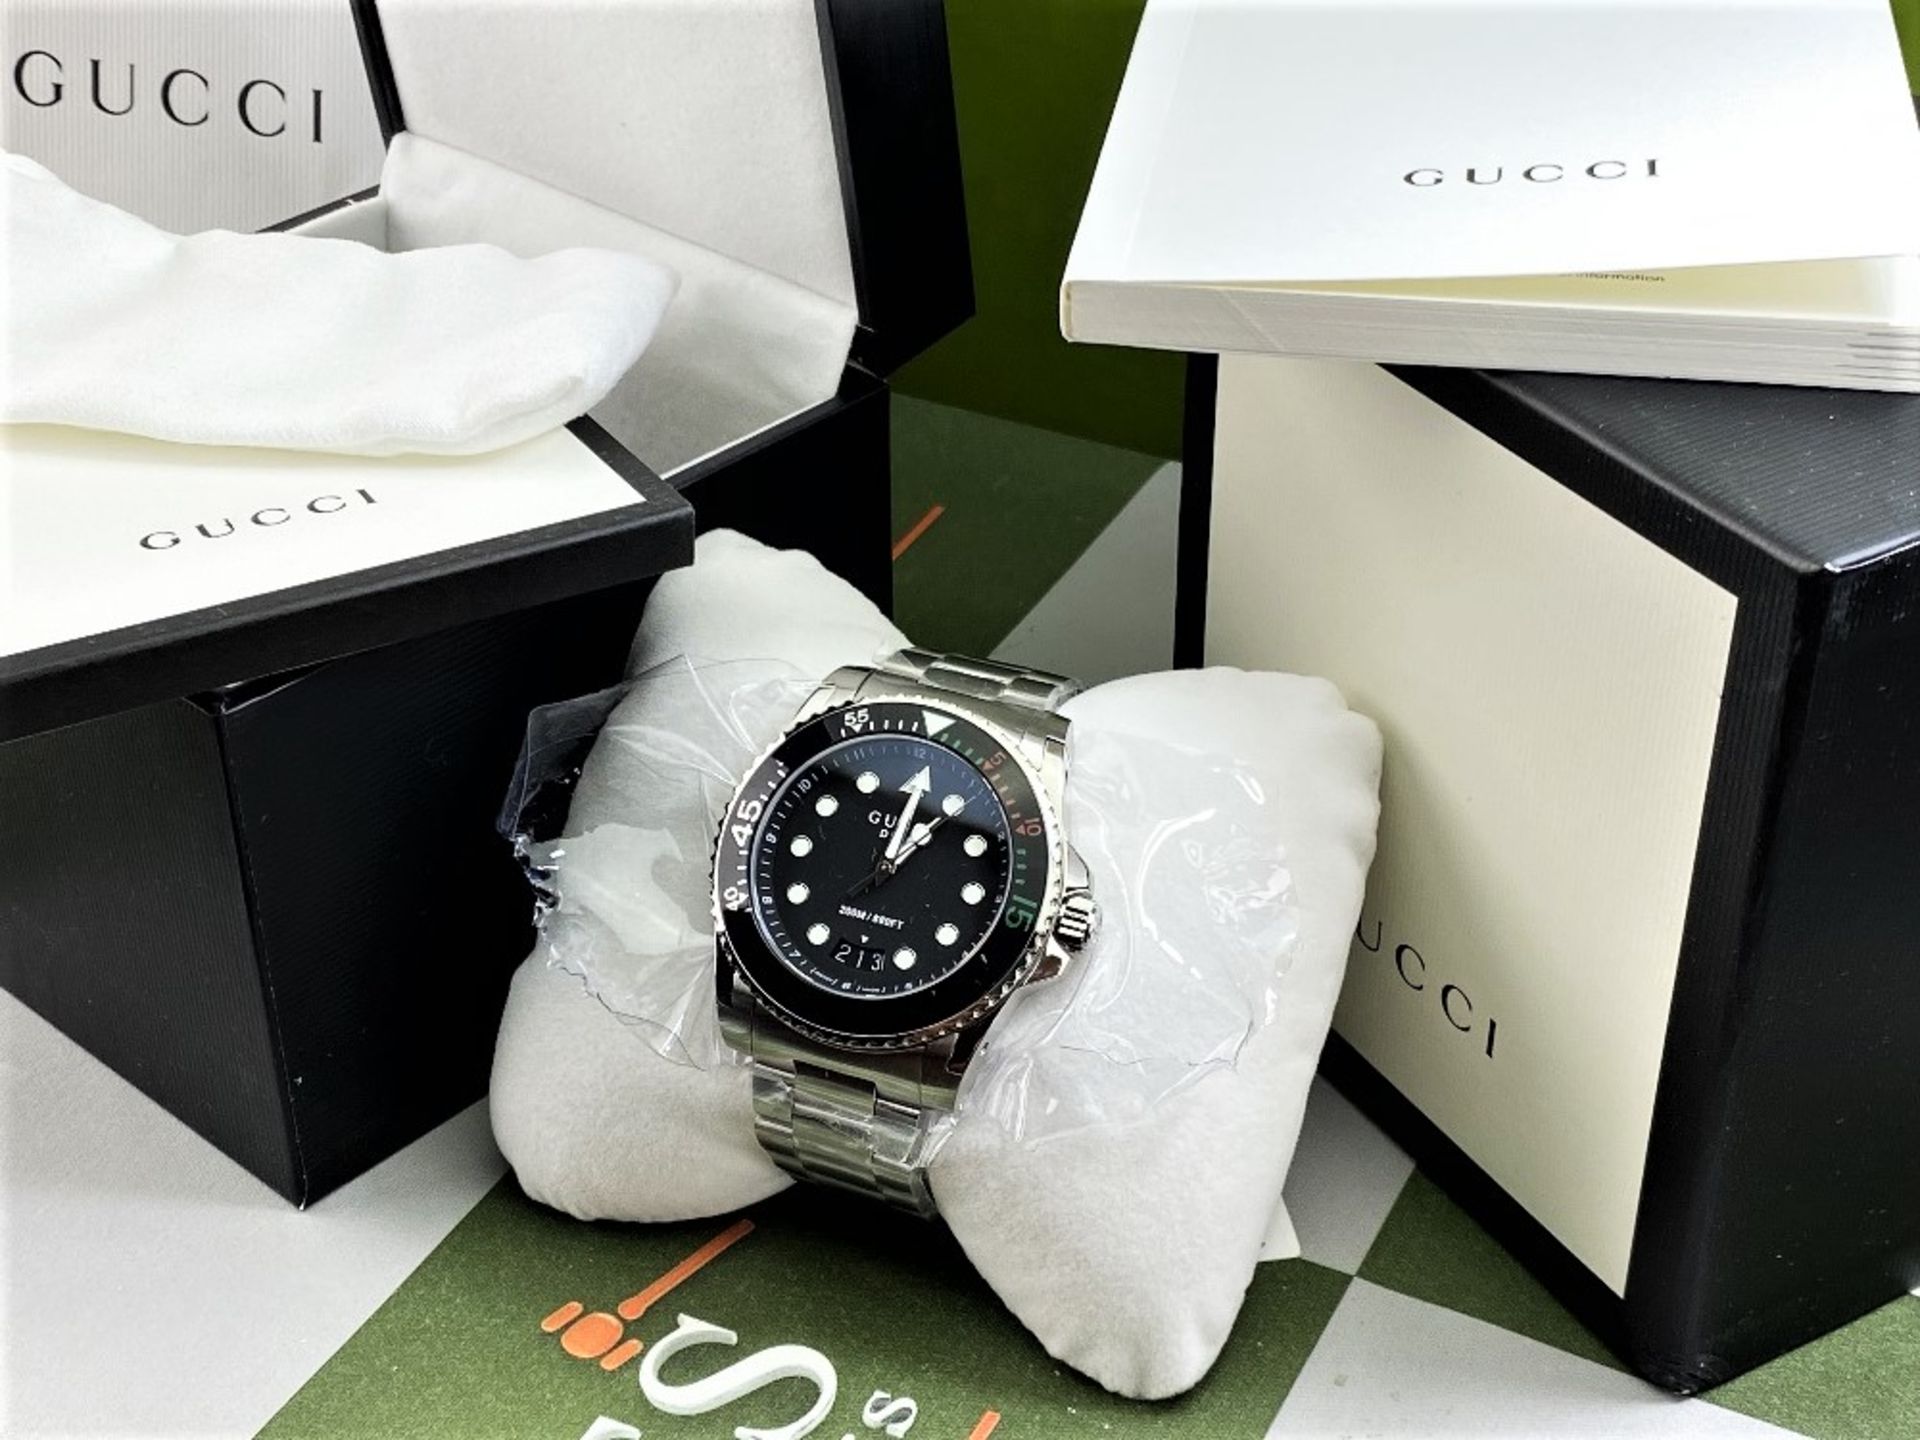 Gucci Dive XL Black Men's Watch - YA136208-New Example - Image 6 of 8